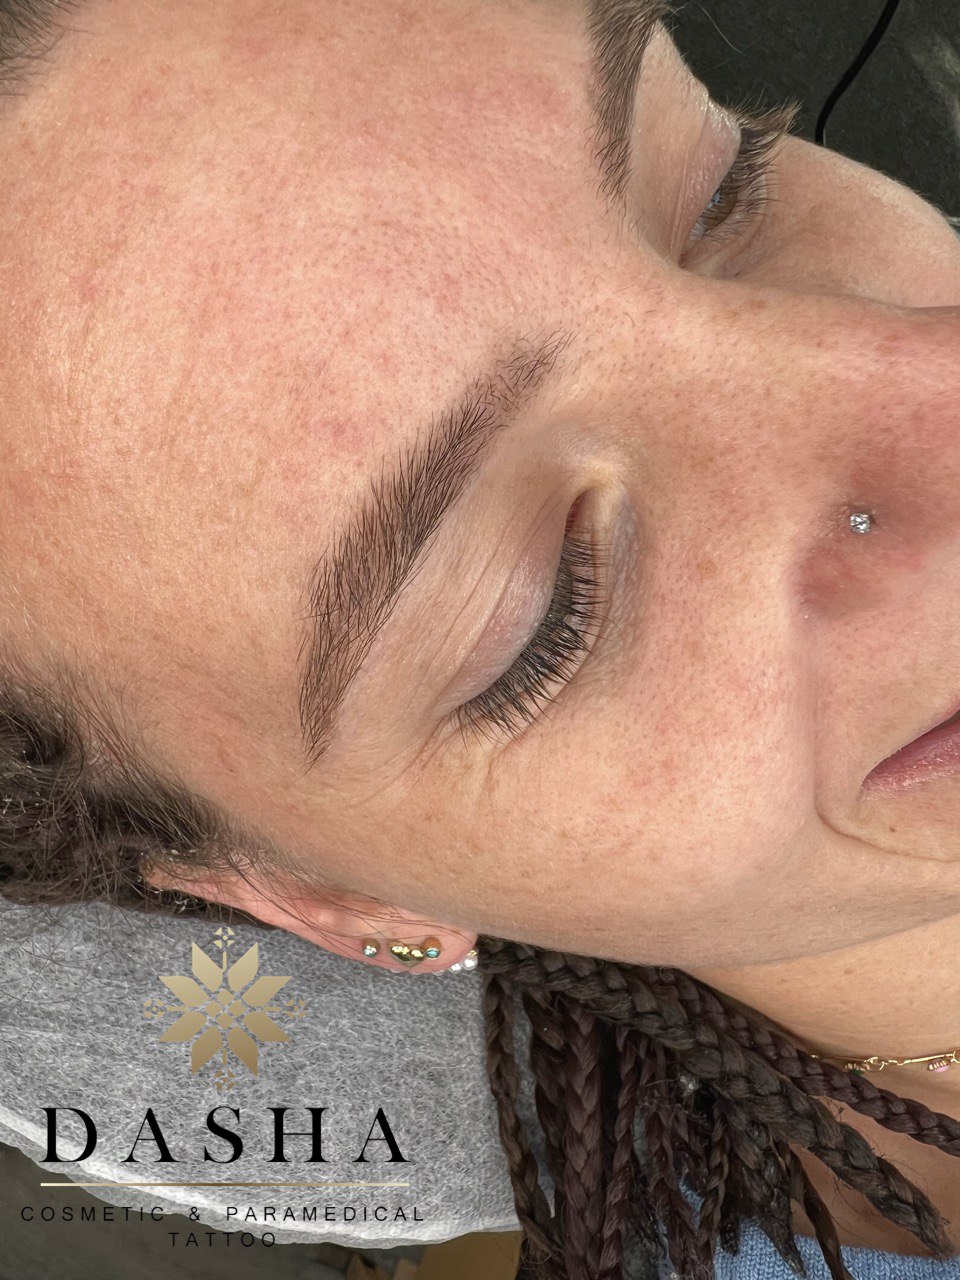 Brows Permanent Makeup. Cosmetic and Mediical Tattoo by Dasha. Permanent makeup and reconstructive tattoo, scalp micro-pigmentation in Christchurch, New Zealand